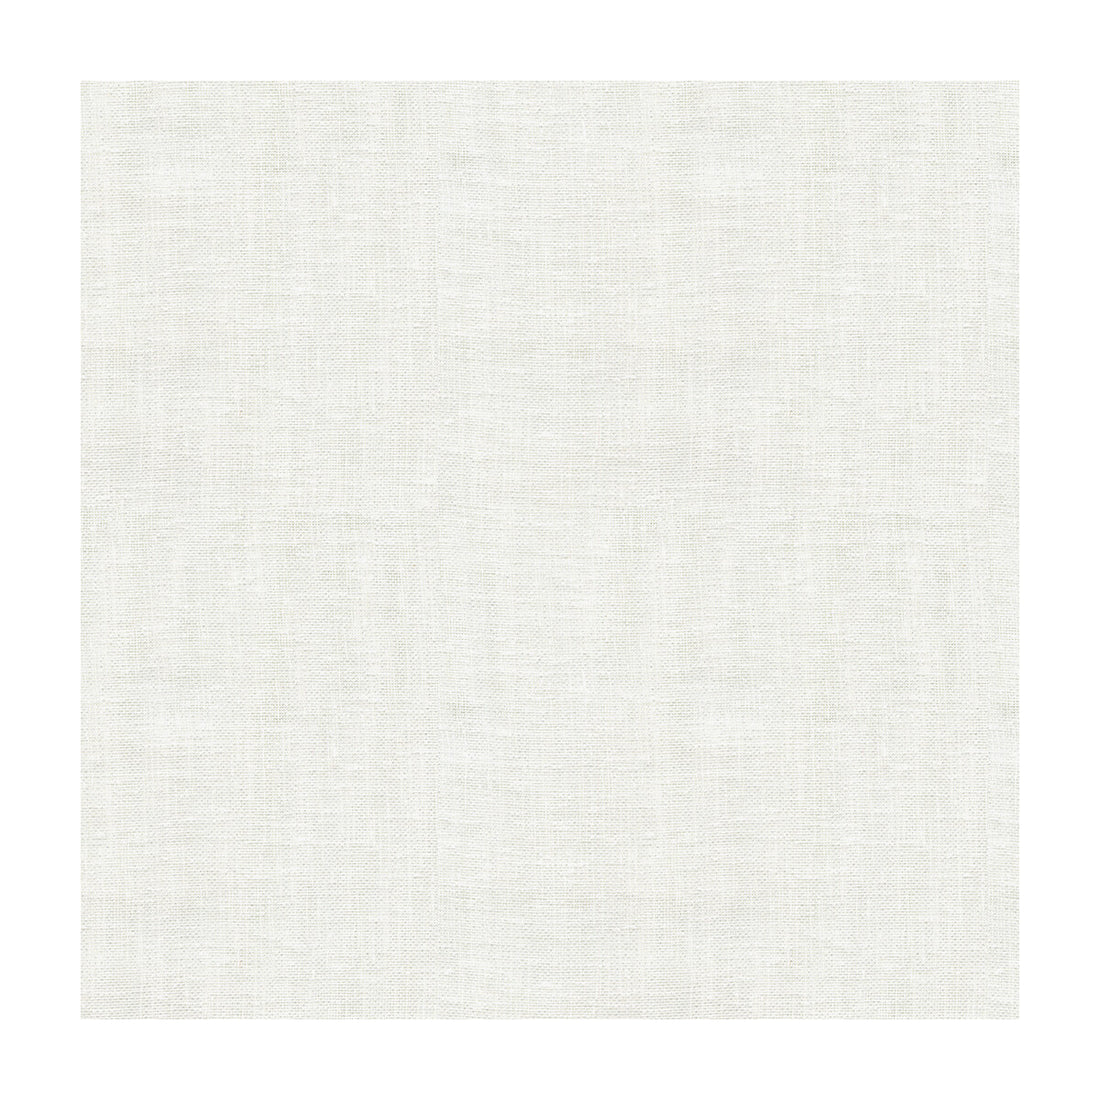 Kravet Contract fabric in 4166-101 color - pattern 4166.101.0 - by Kravet Contract